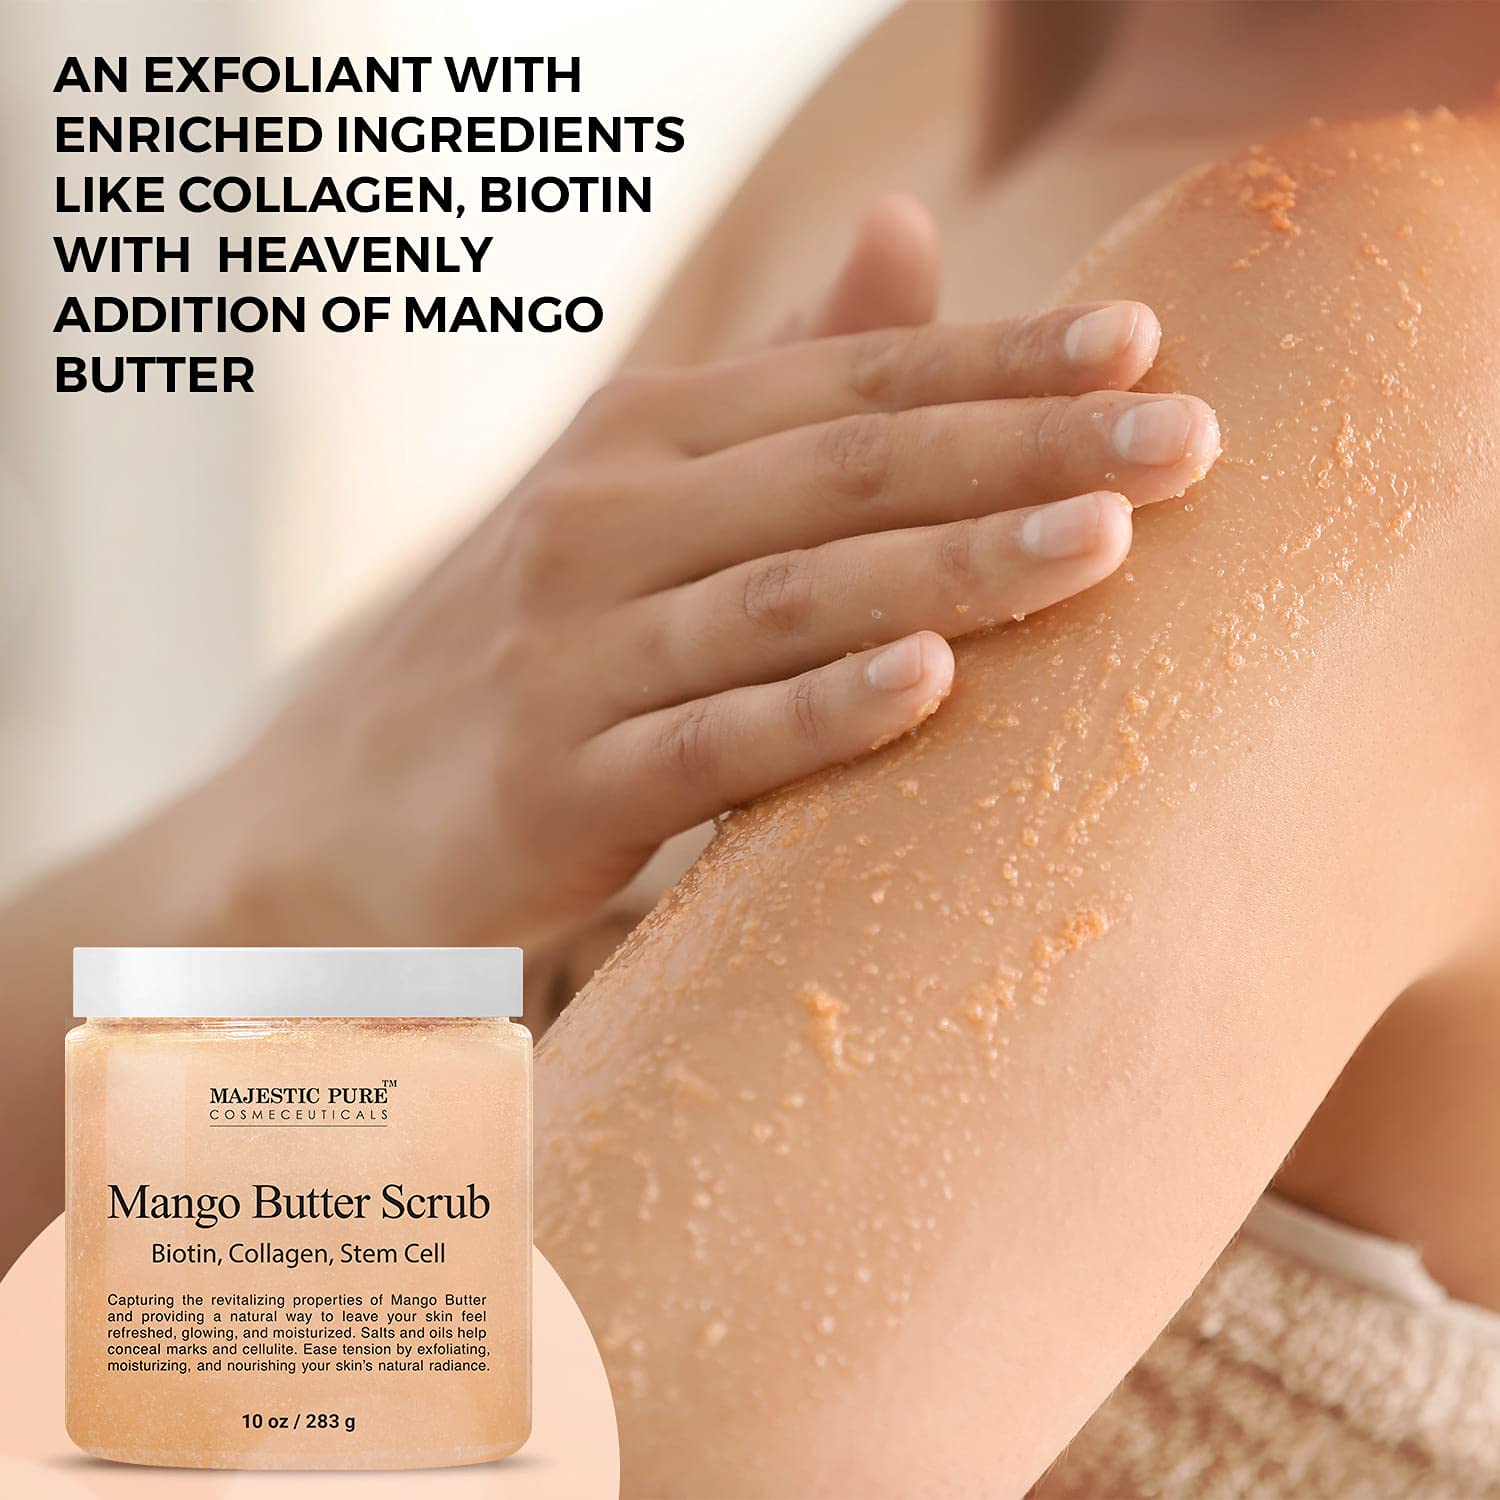 Majestic Pure Mango Butter Body Scrub - With Biotin, Collagen, Stem Cell - Exfoliating Salt Scrub to Exfoliate and Moisturize Skin - Deep Skin Cleanser - Natural Skin Care for Men and Women - 10 oz : Beauty & Personal Care